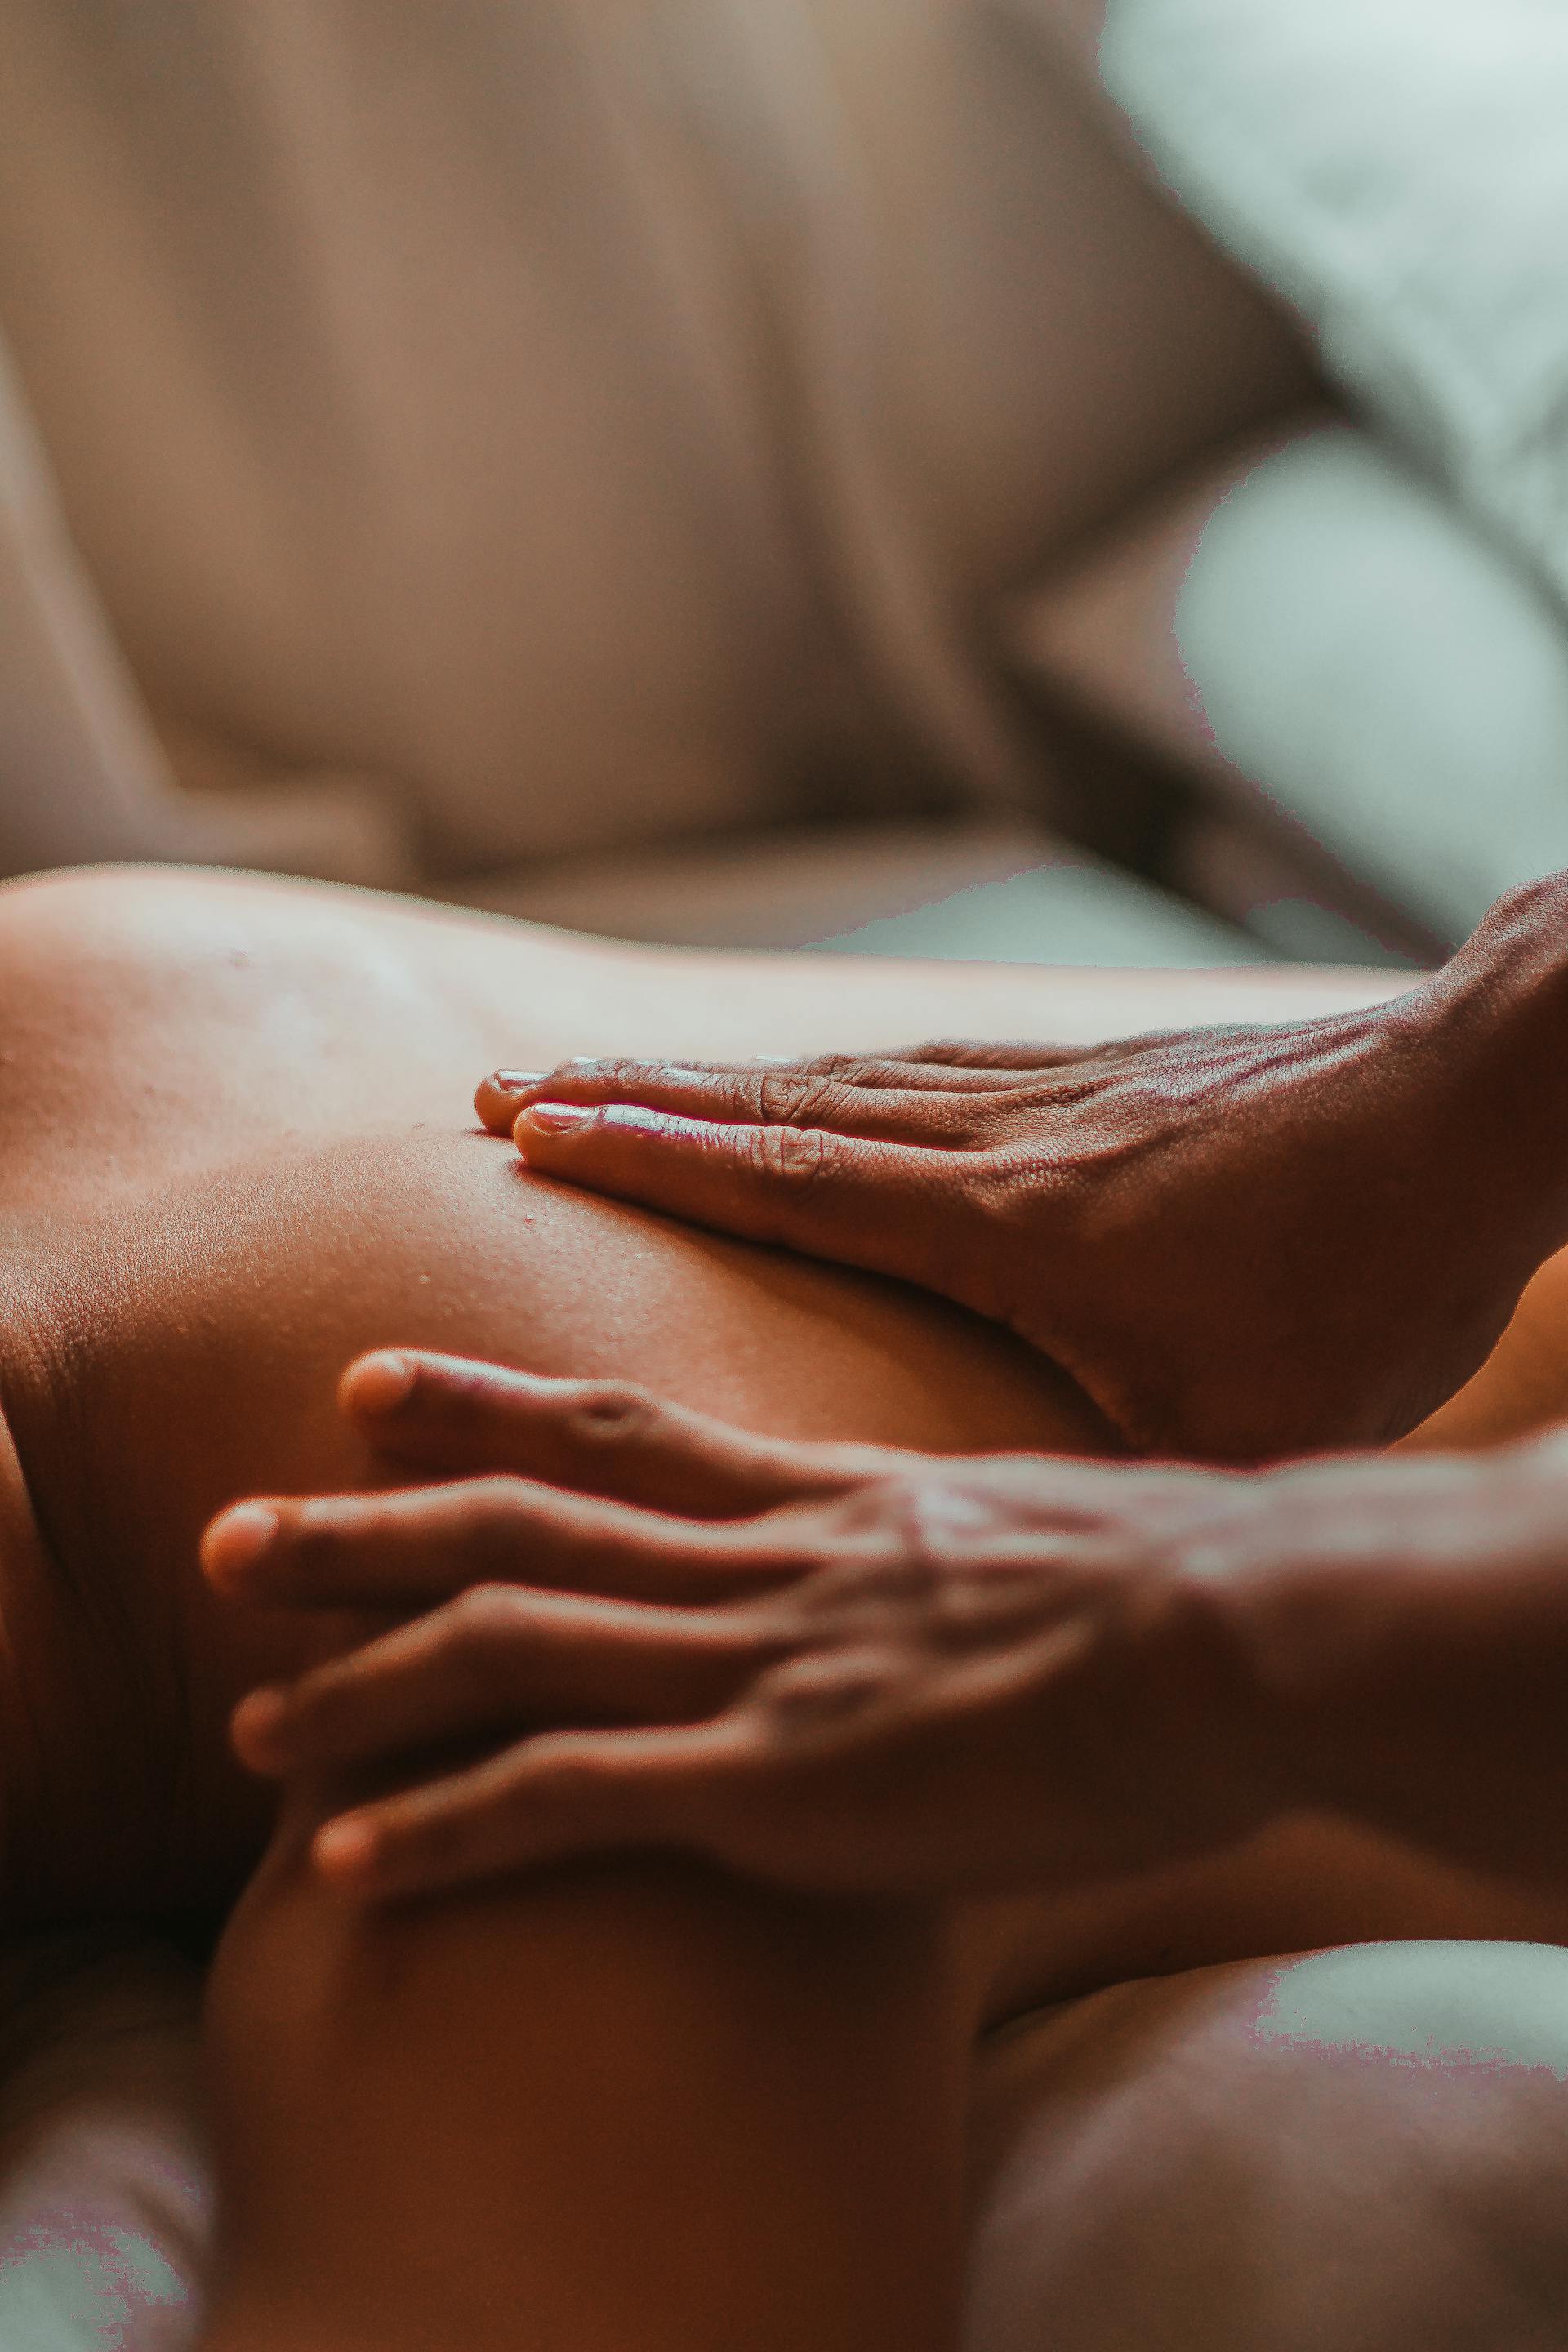 A person getting a massage | Source: Pexels